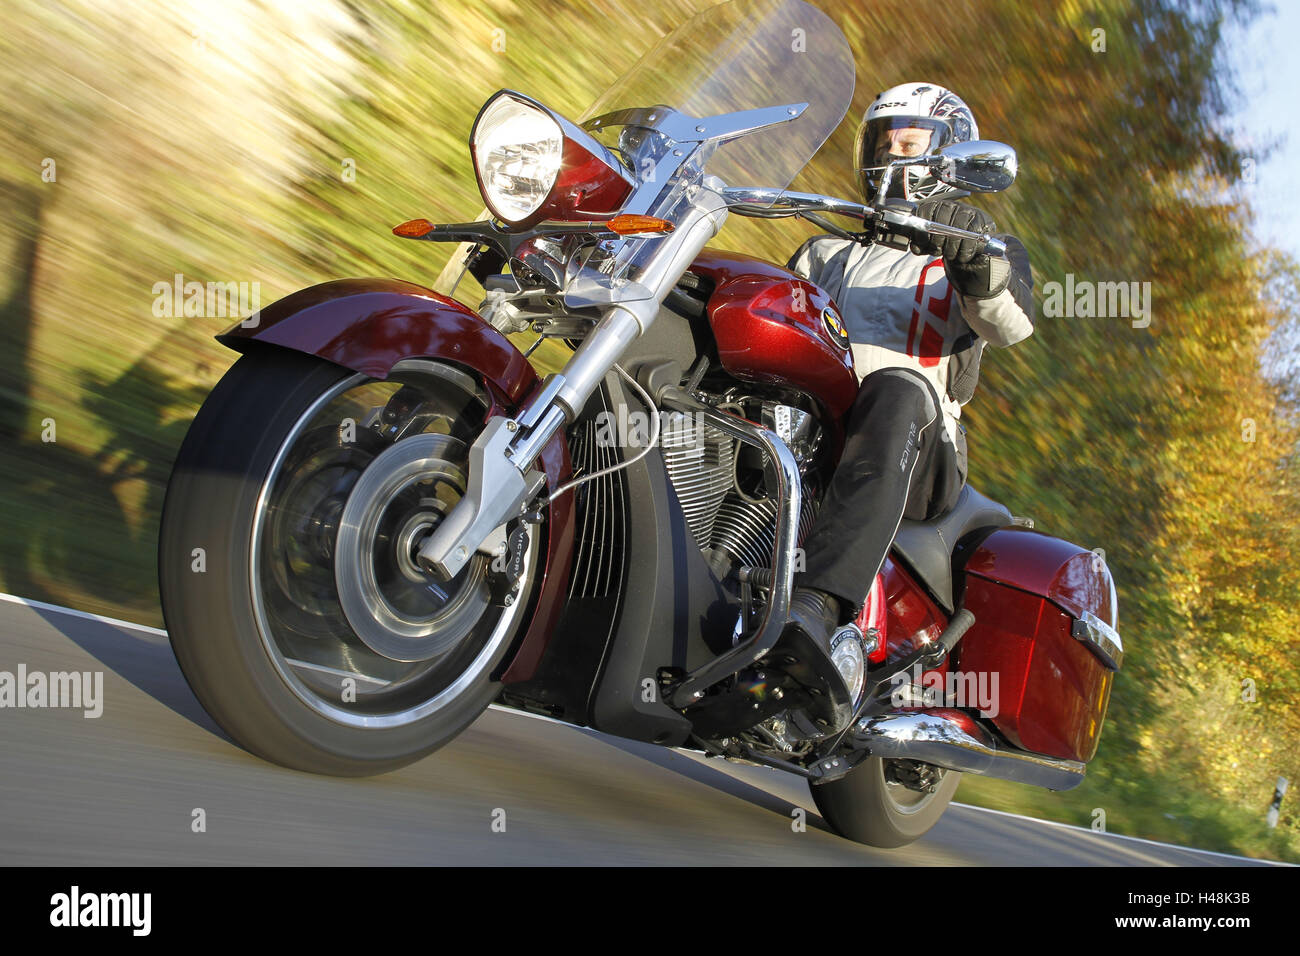 Motorcyclist, motorcycle, country road, panning, below shot, travel motorcycle, Victory, Stock Photo